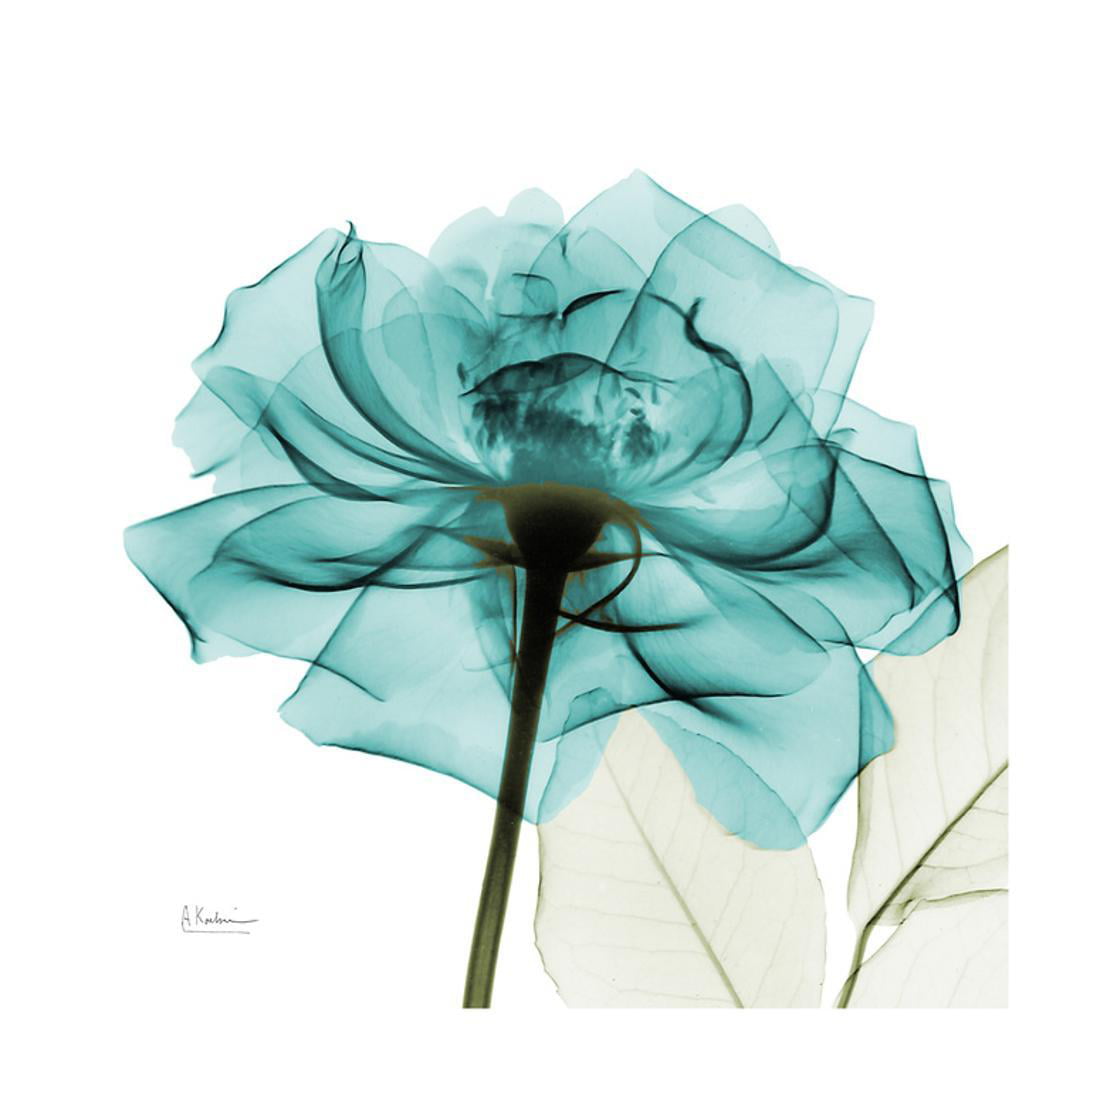 Teal Rose Blue Flower X-Ray Photography Print Wall Art By Albert